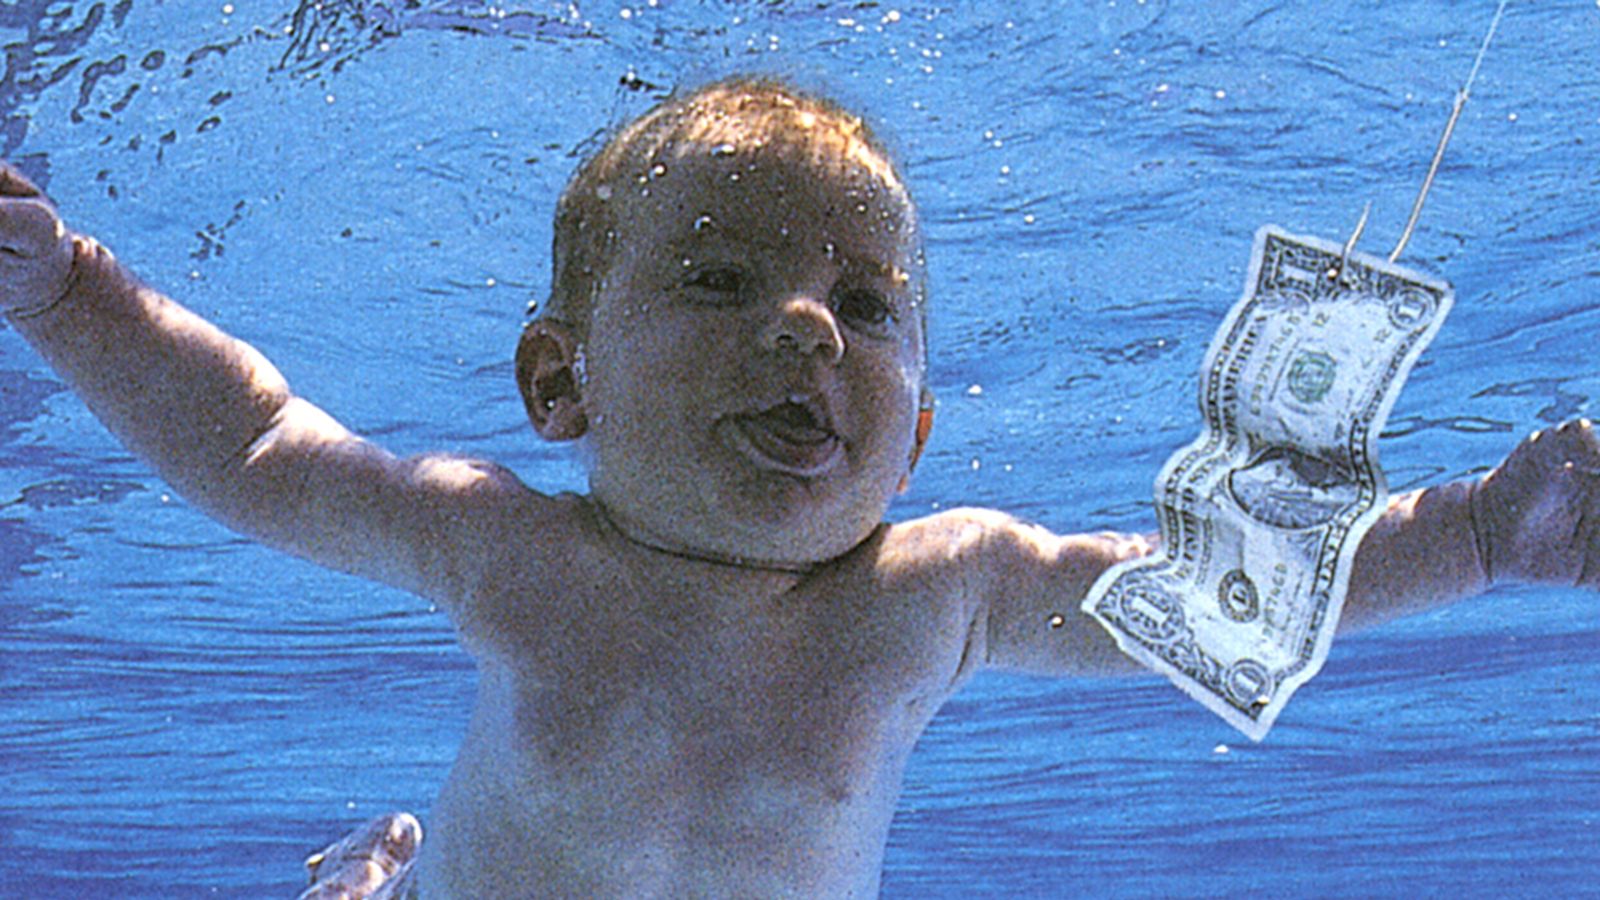 Nirvana: Nevermind lawsuit over cover artwork of naked baby is dismissed by judge in California